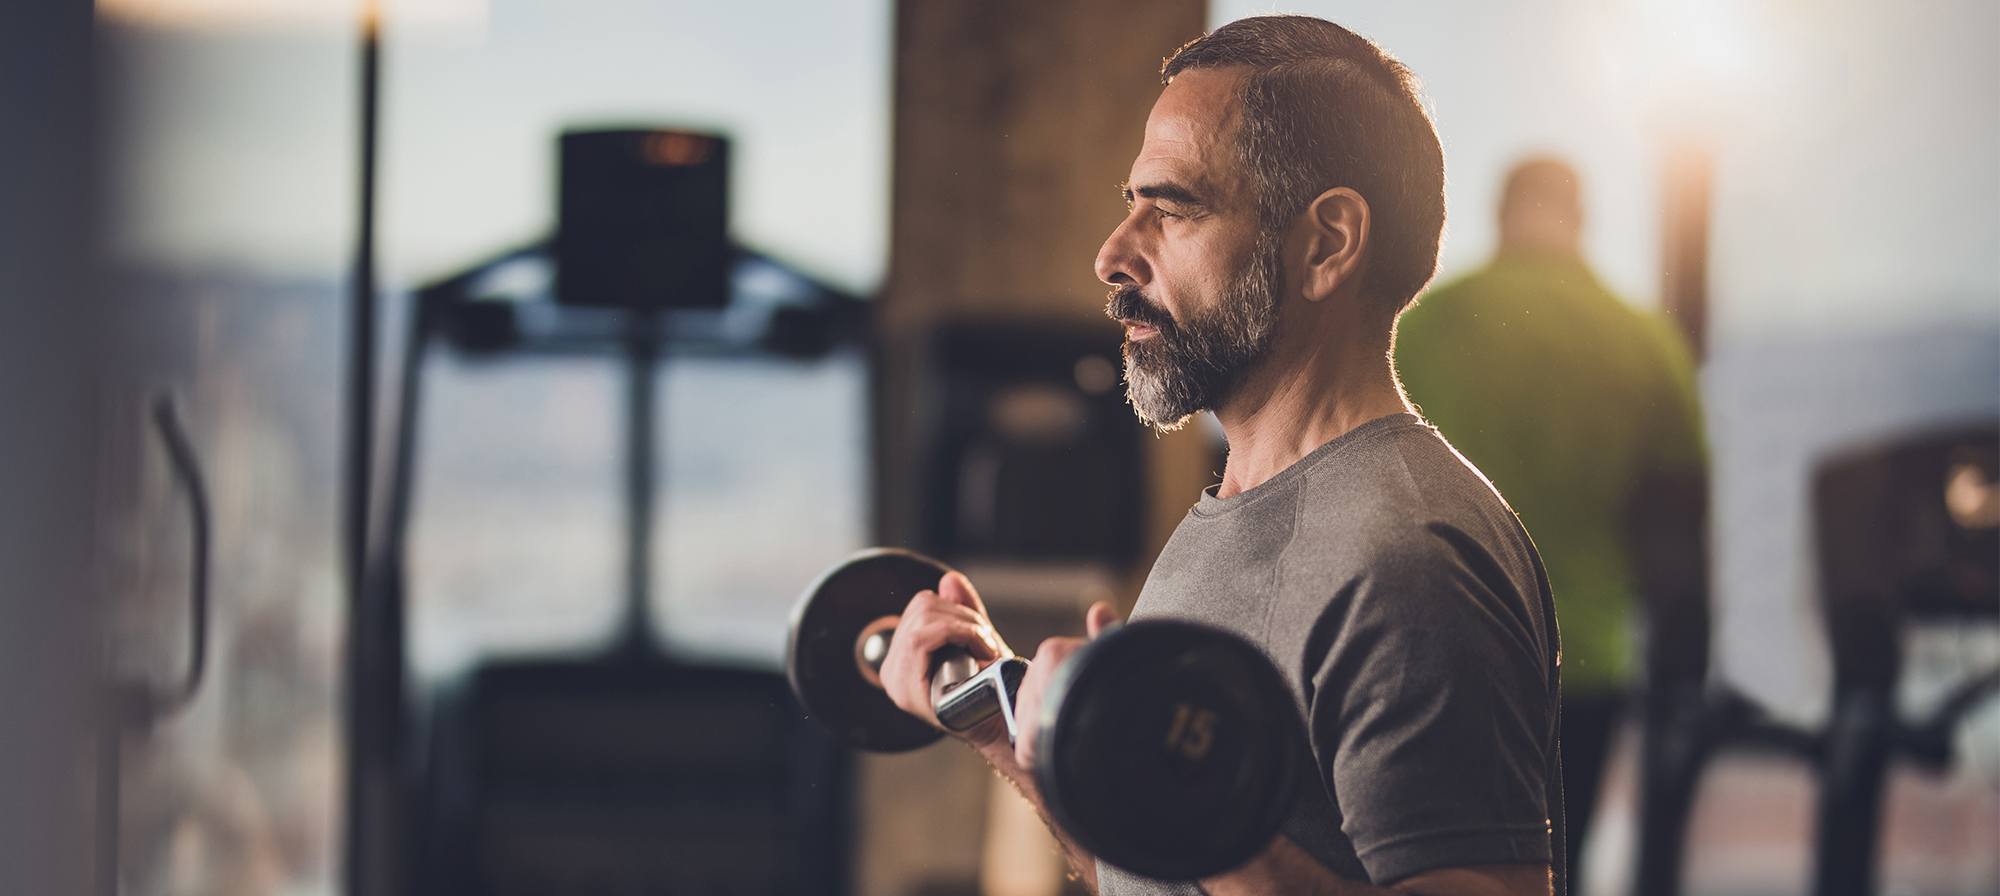 4 Post-Workout Tips for Better Muscle Recovery